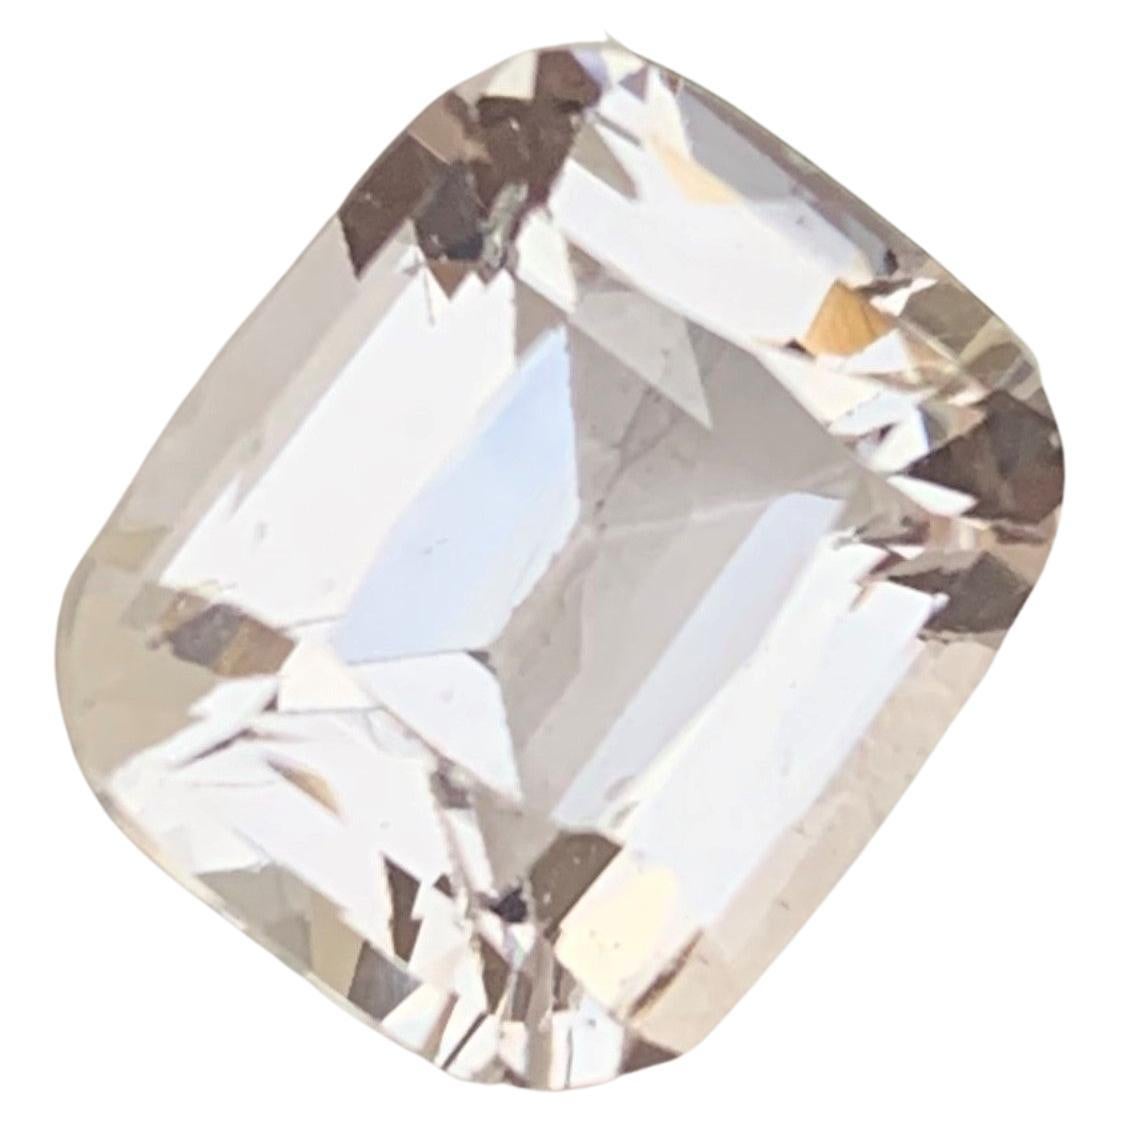 4.50 Carat Colorless Faceted Morganite Gem Available For Jewelry Making For Sale